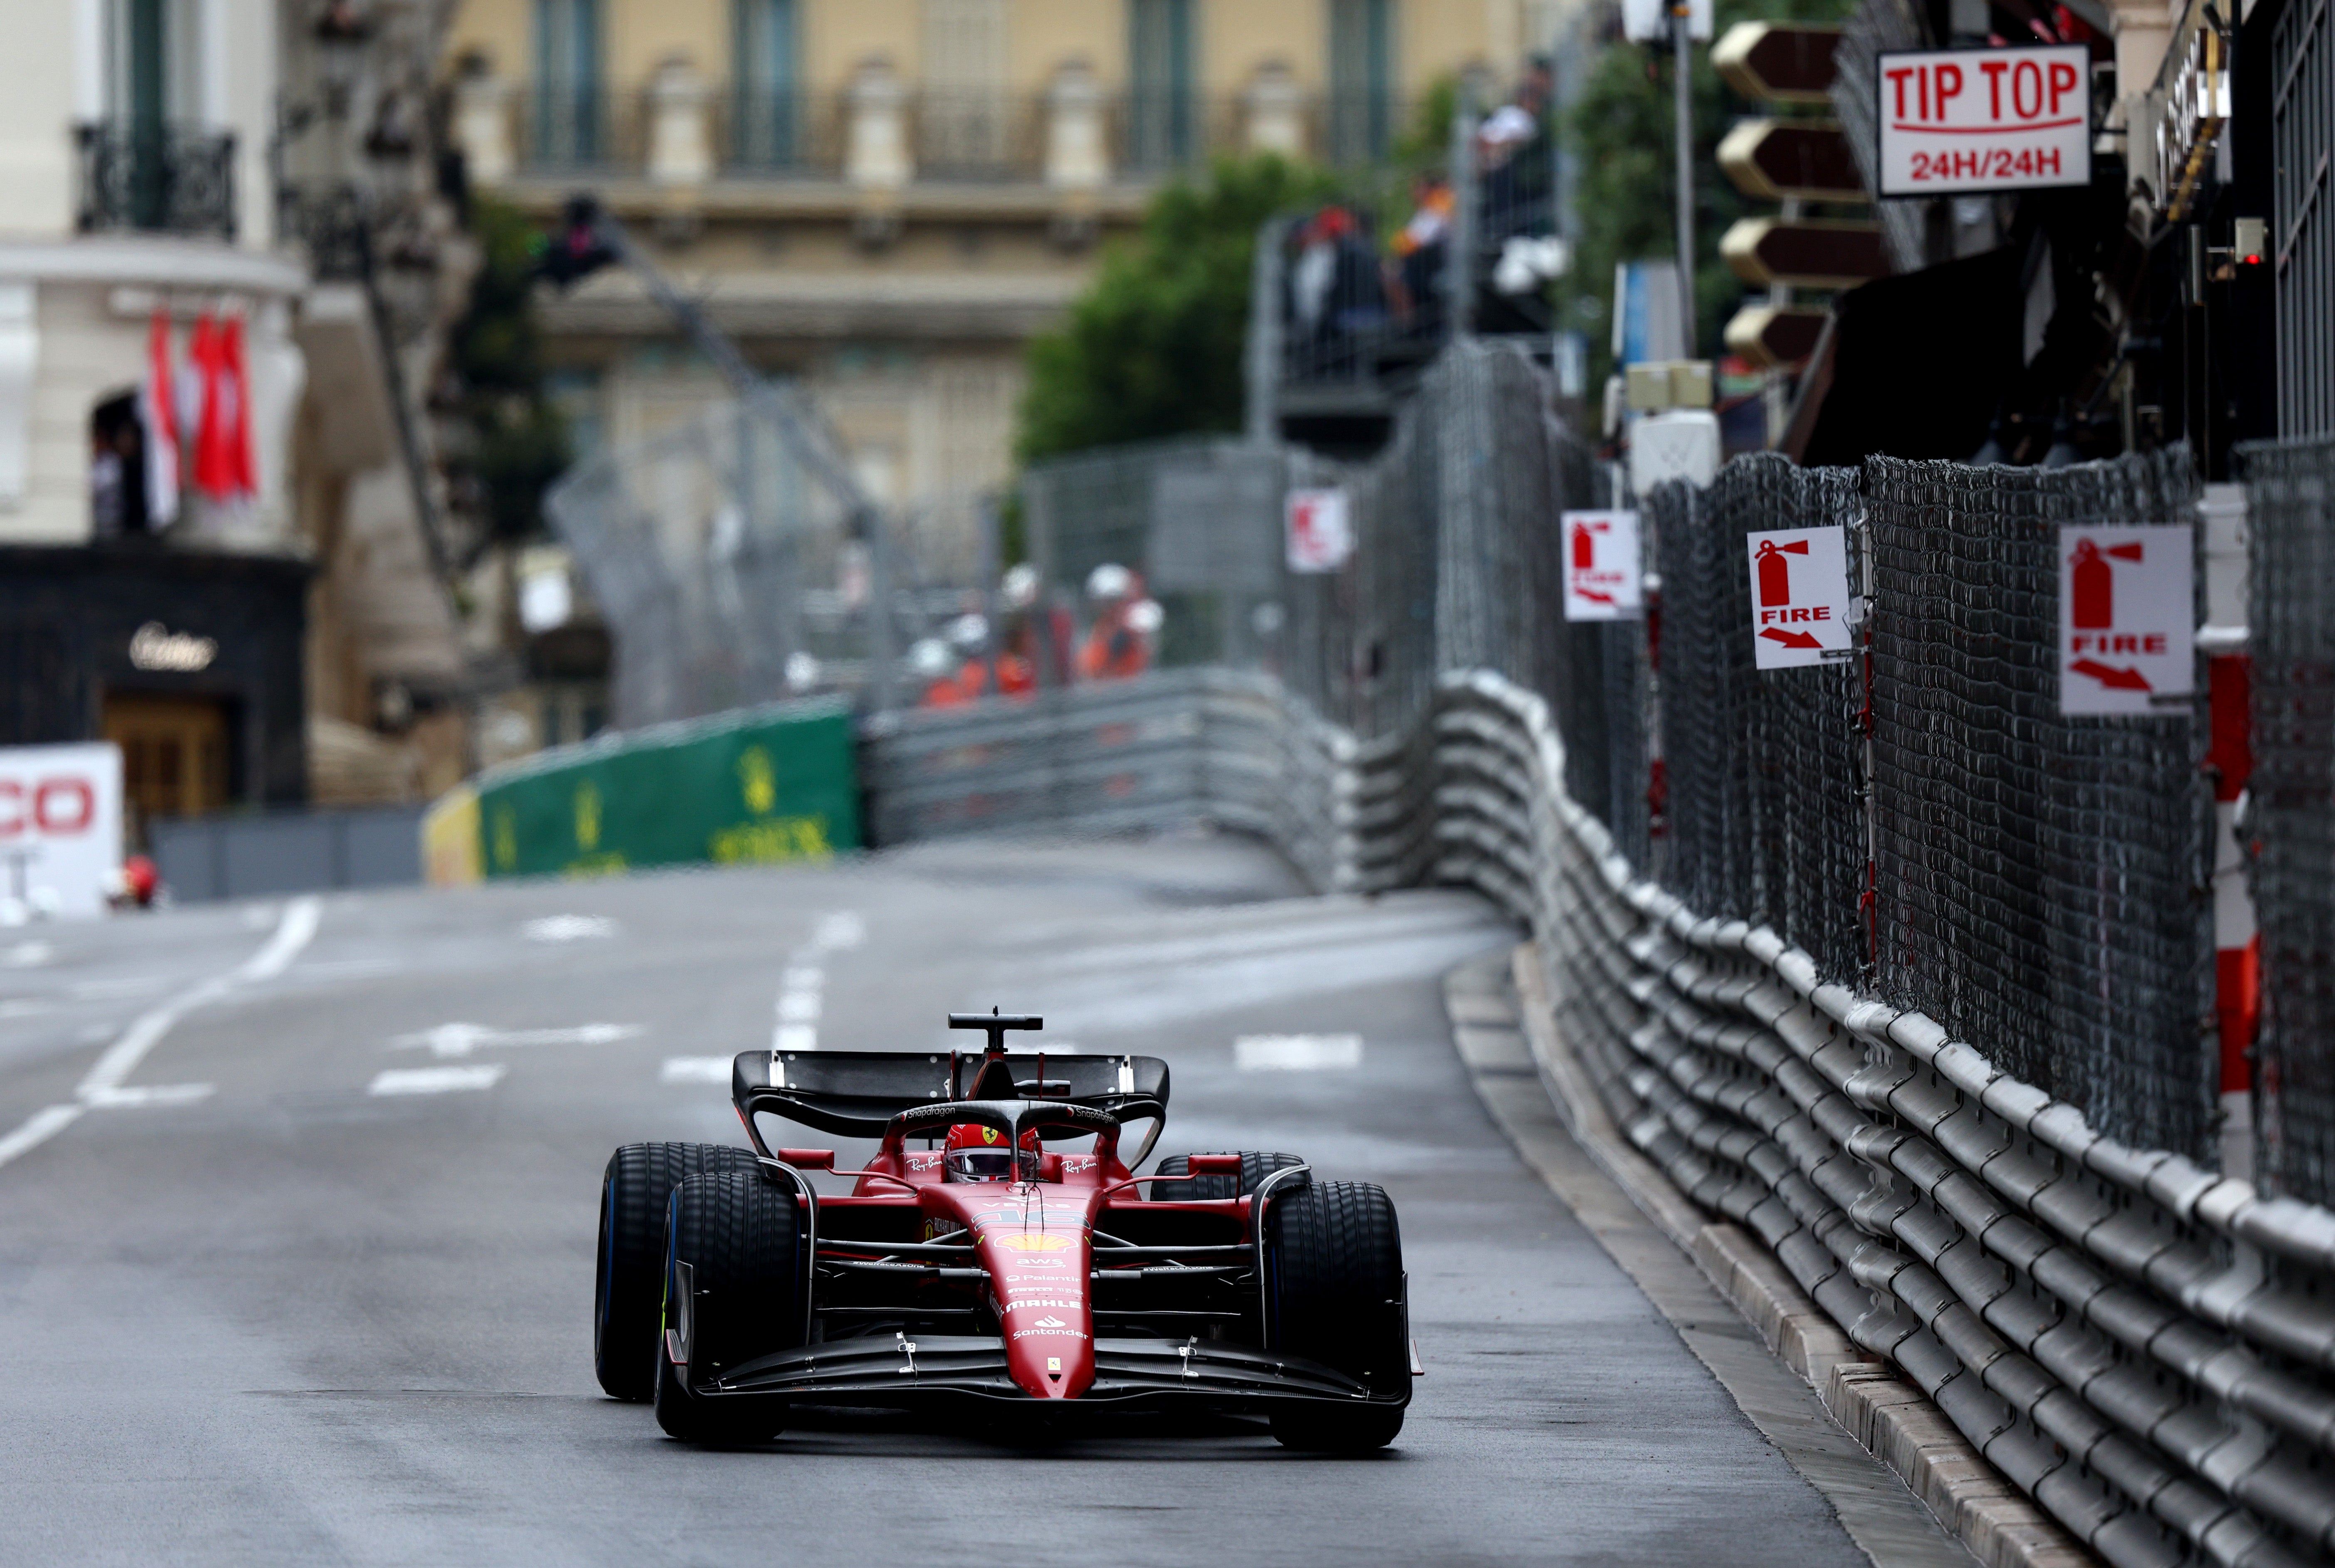 Charles Leclerc was frustrated by the Monaco Grand Prix